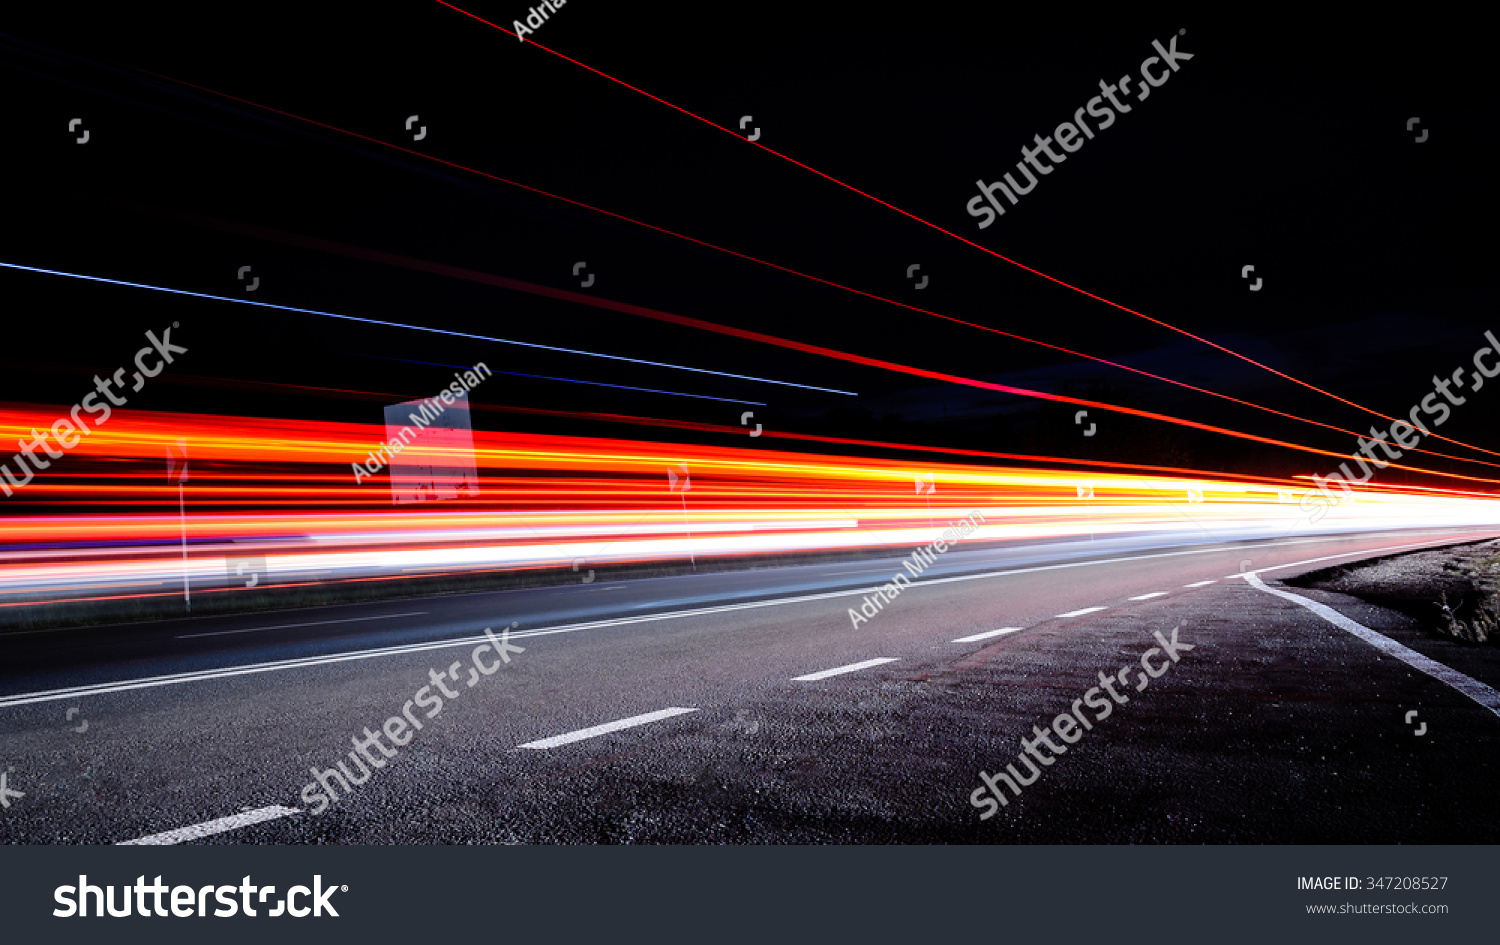 Three red lines / red light trails at night on the road #347208527